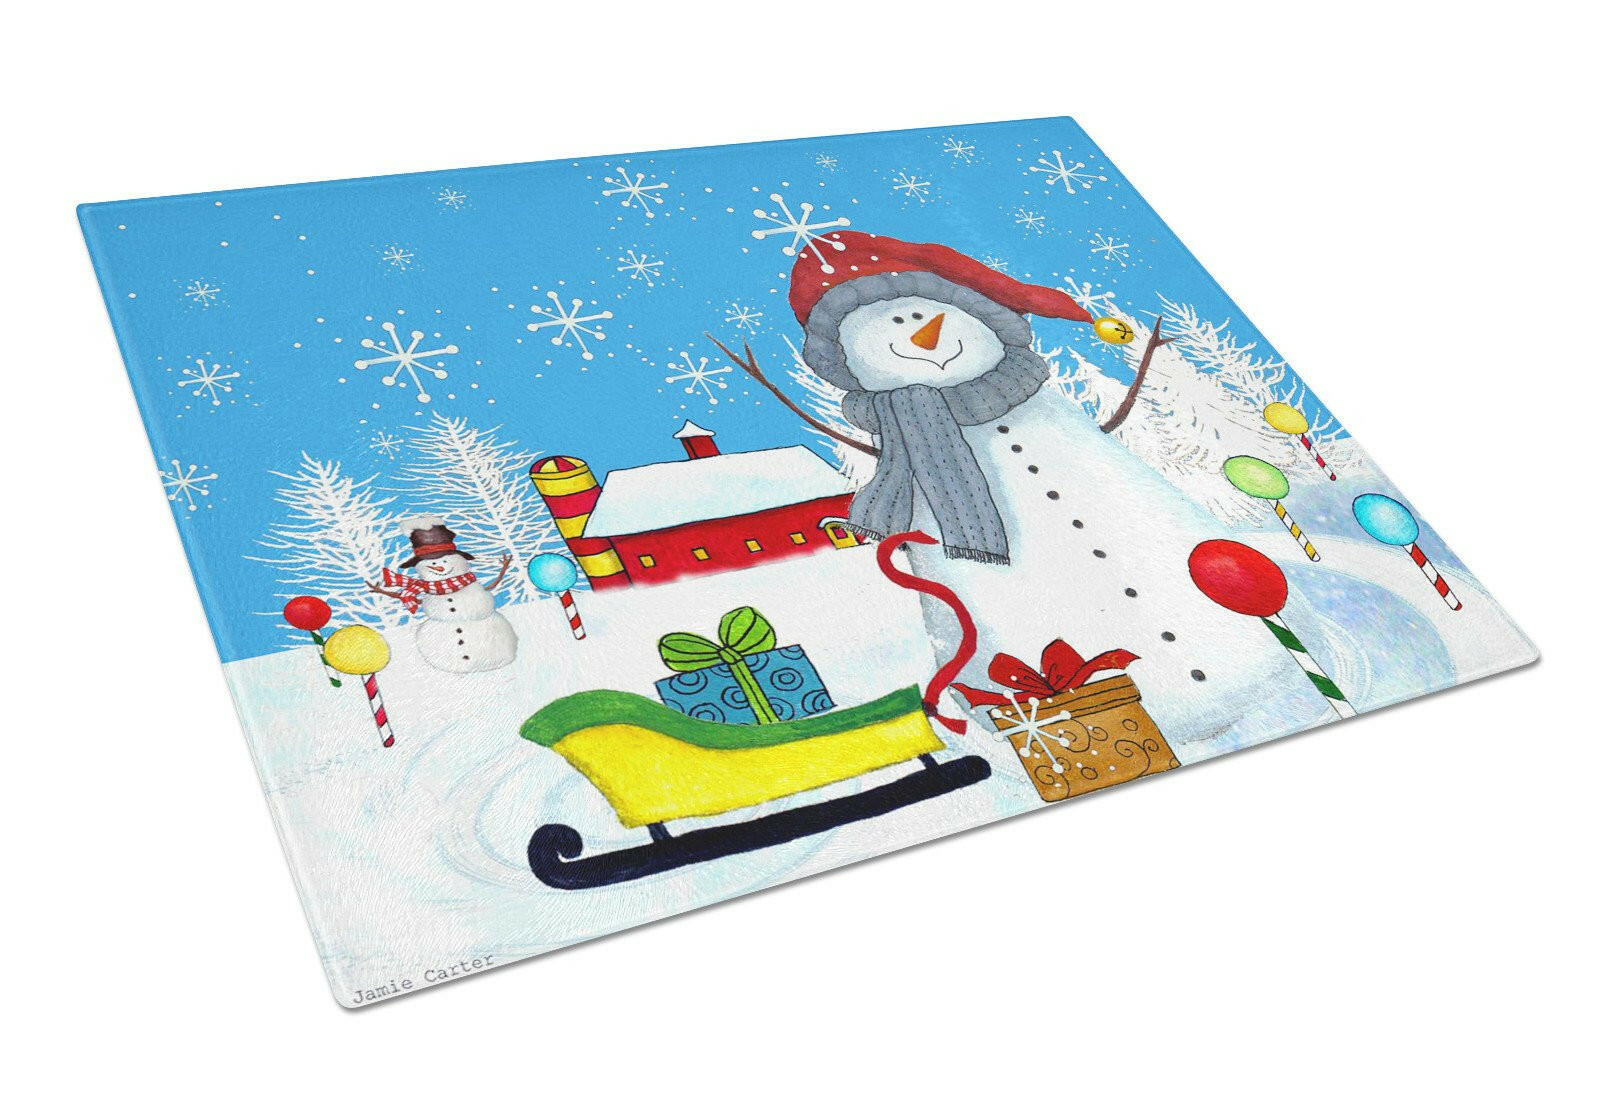 Snow Happens in the Meadow Snowman Glass Cutting Board Large PJC1083LCB by Caroline's Treasures